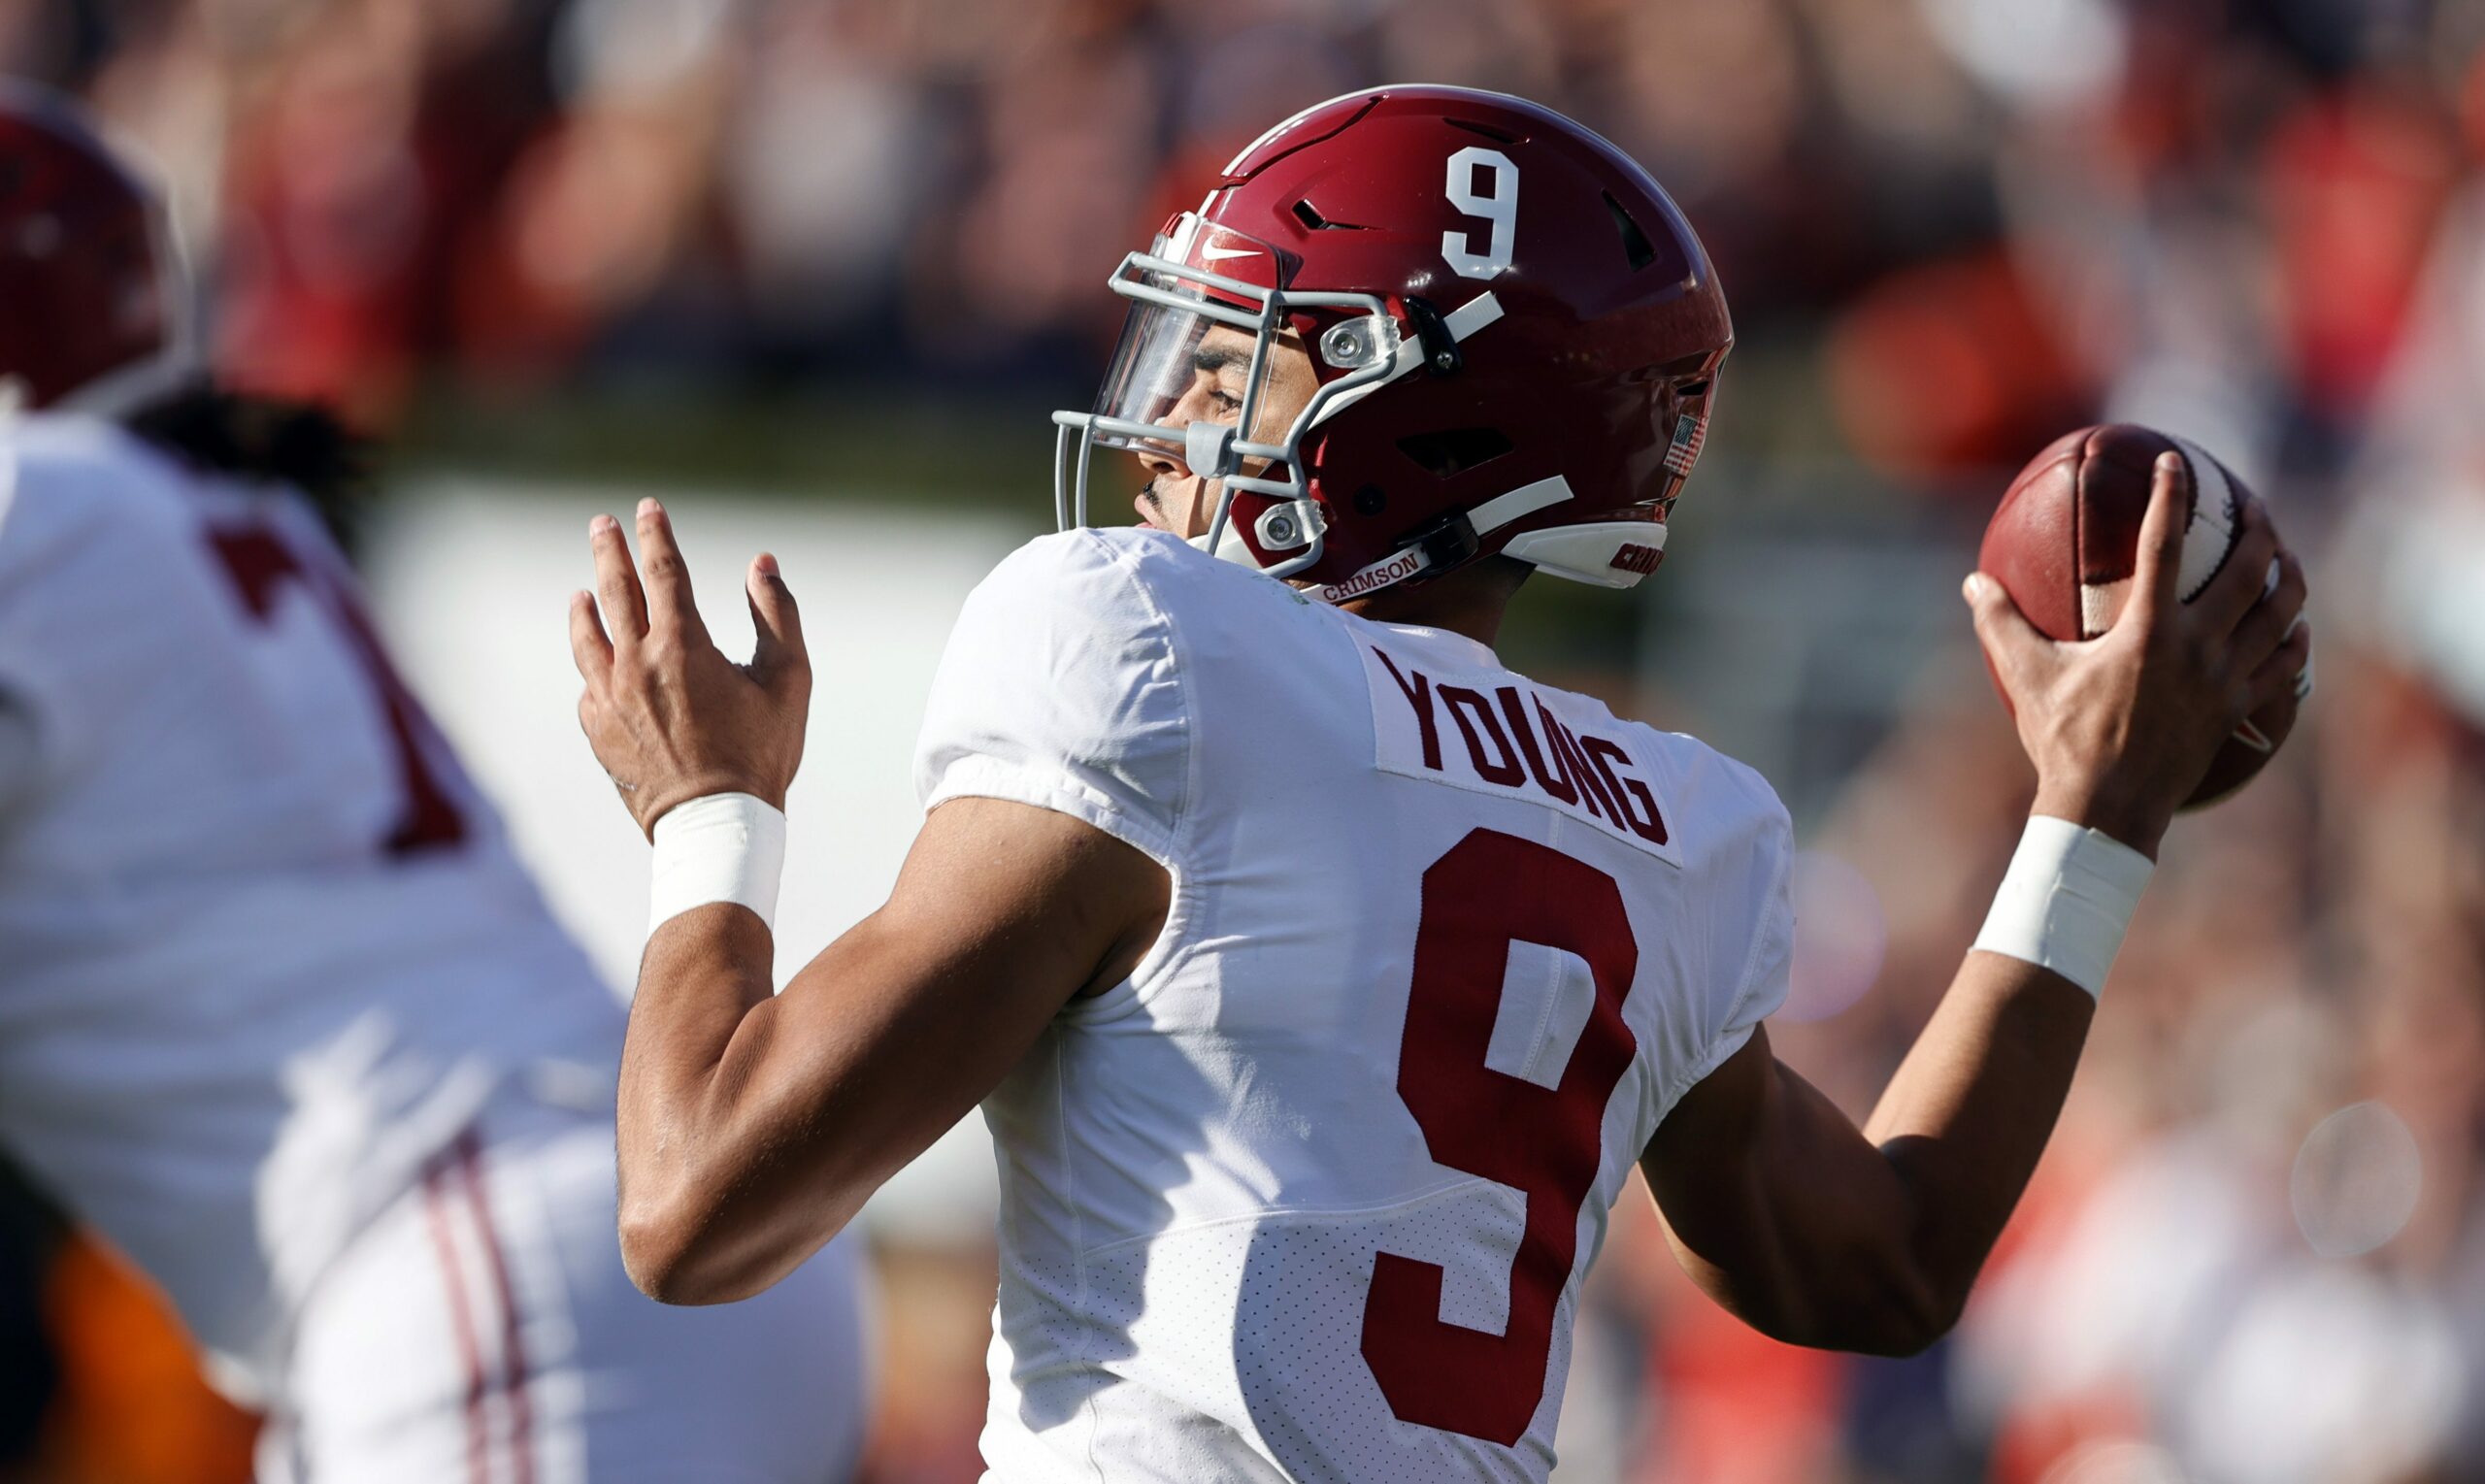 LOOK: Alabama fans react to Bryce Young’s 47-yard TD pass to Kobe Prentice